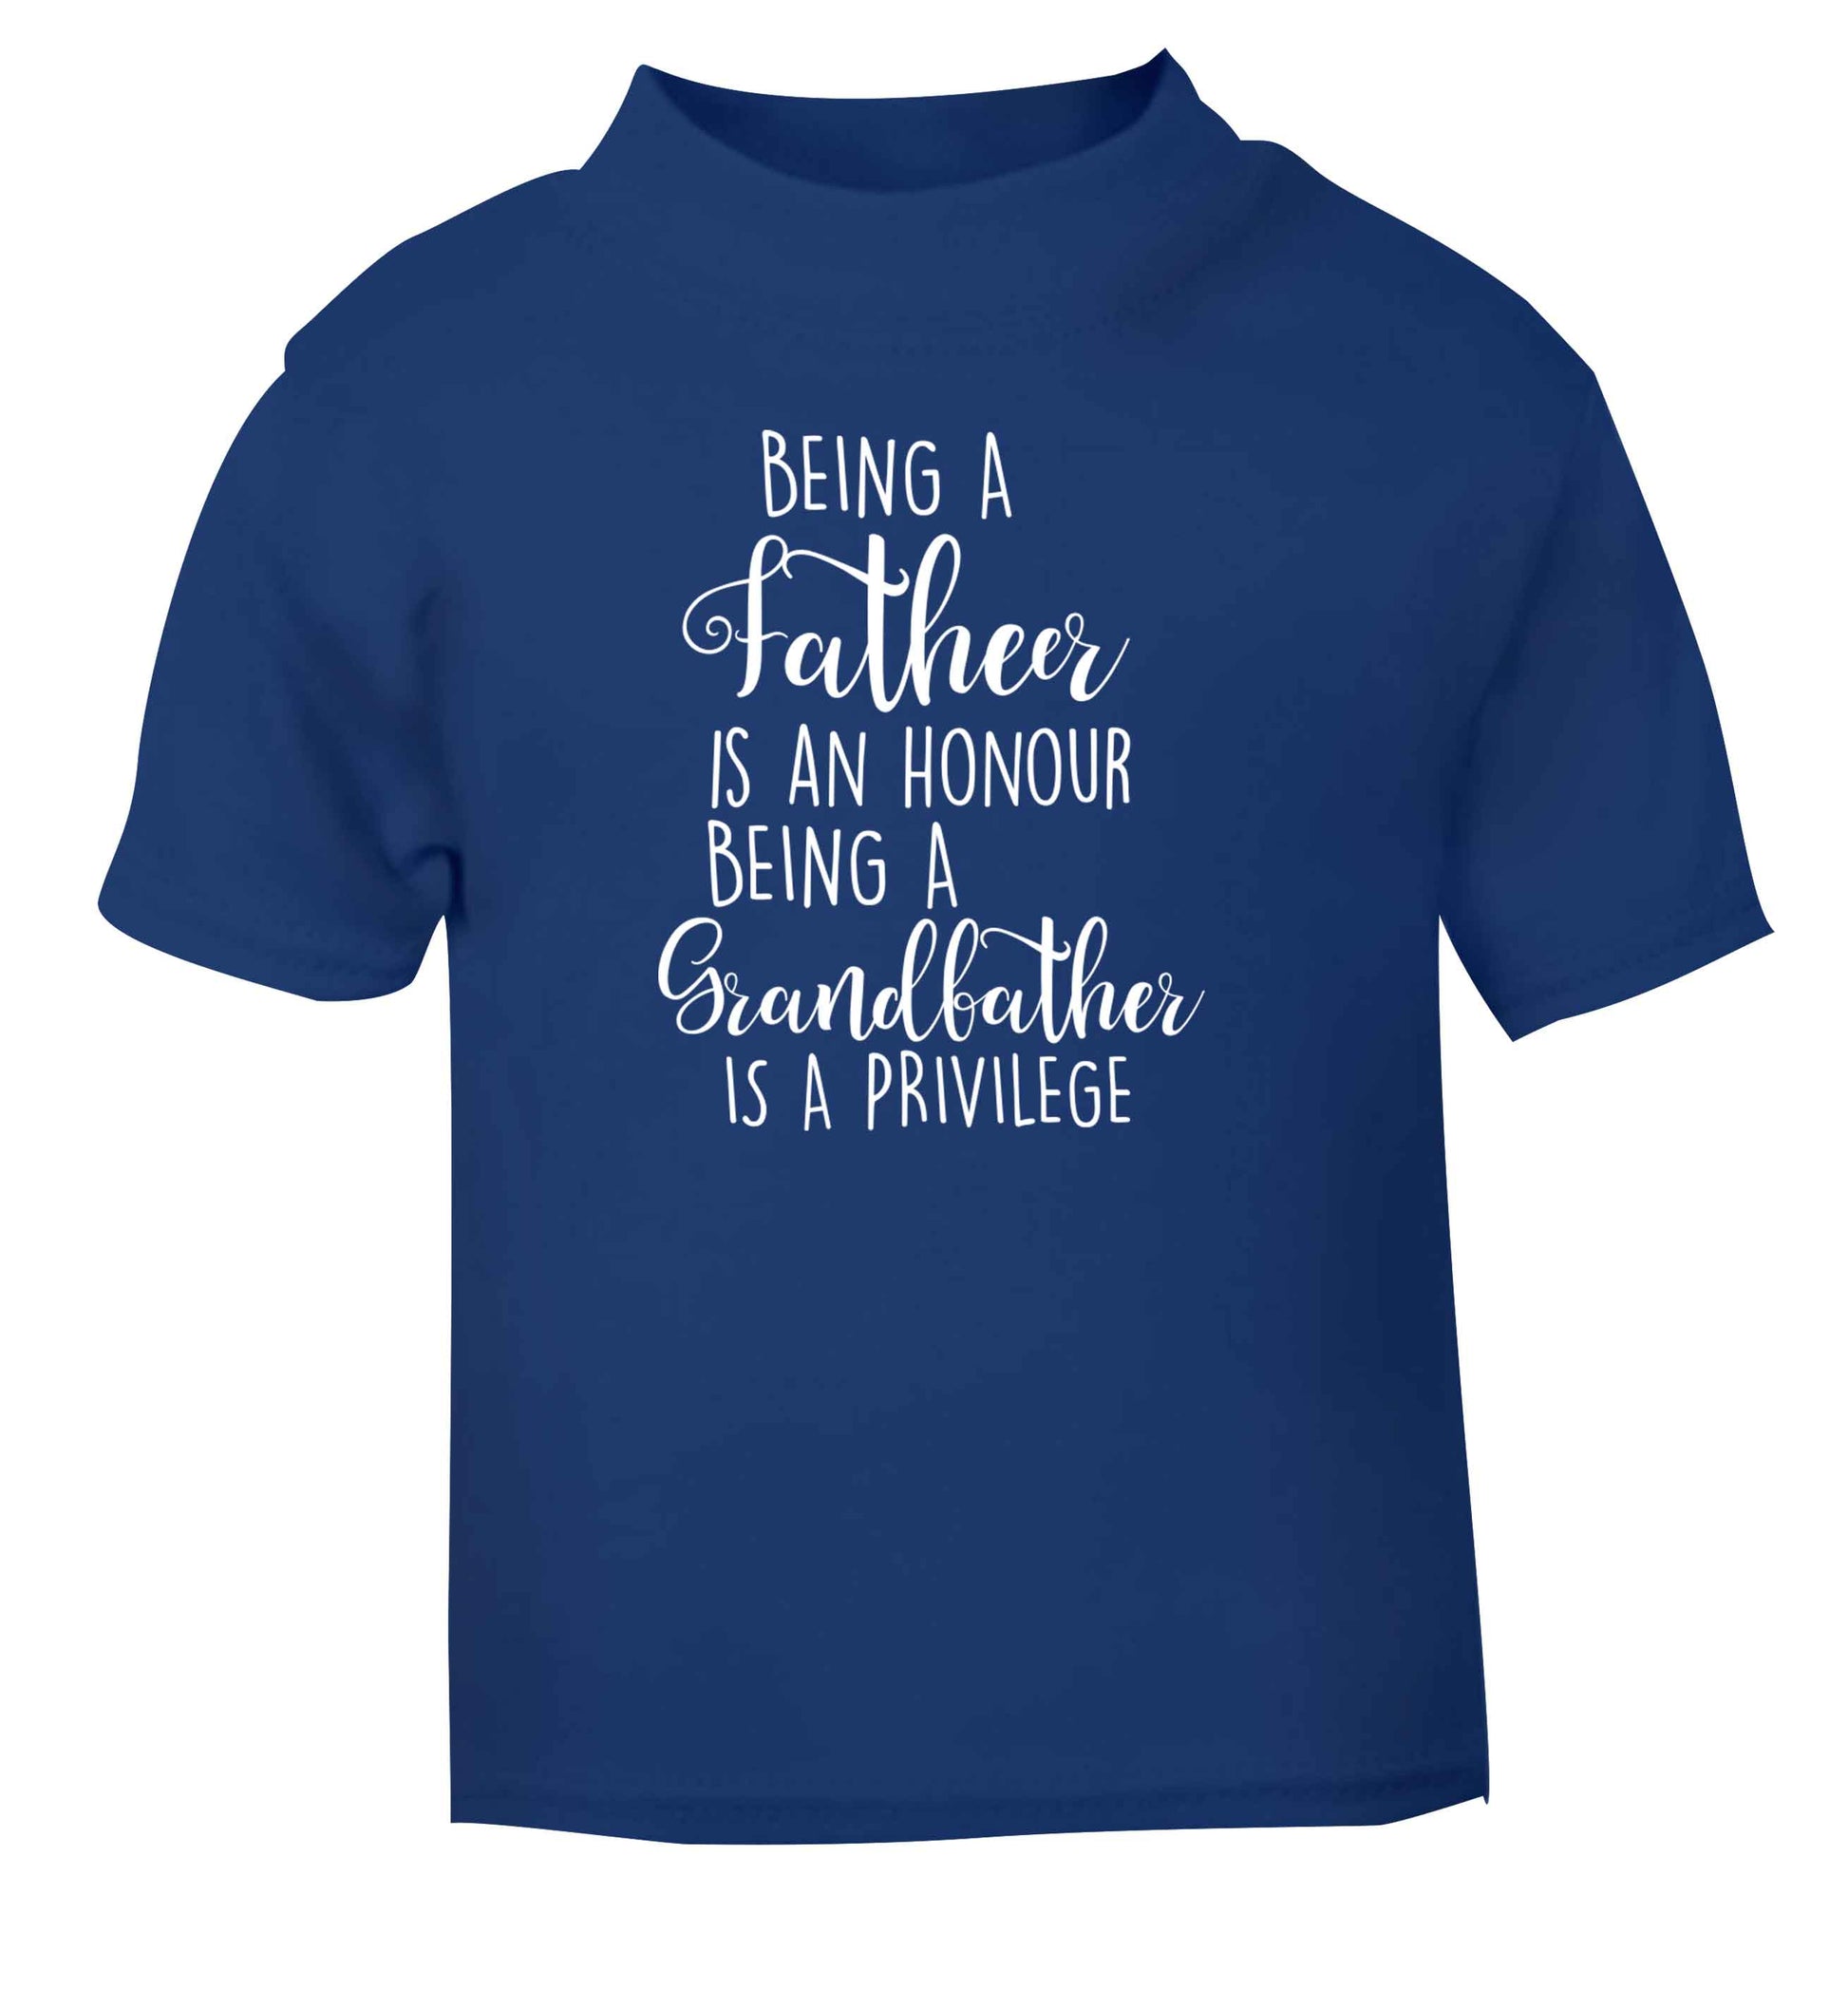 Being a father is an honour being a grandfather is a privilege blue Baby Toddler Tshirt 2 Years